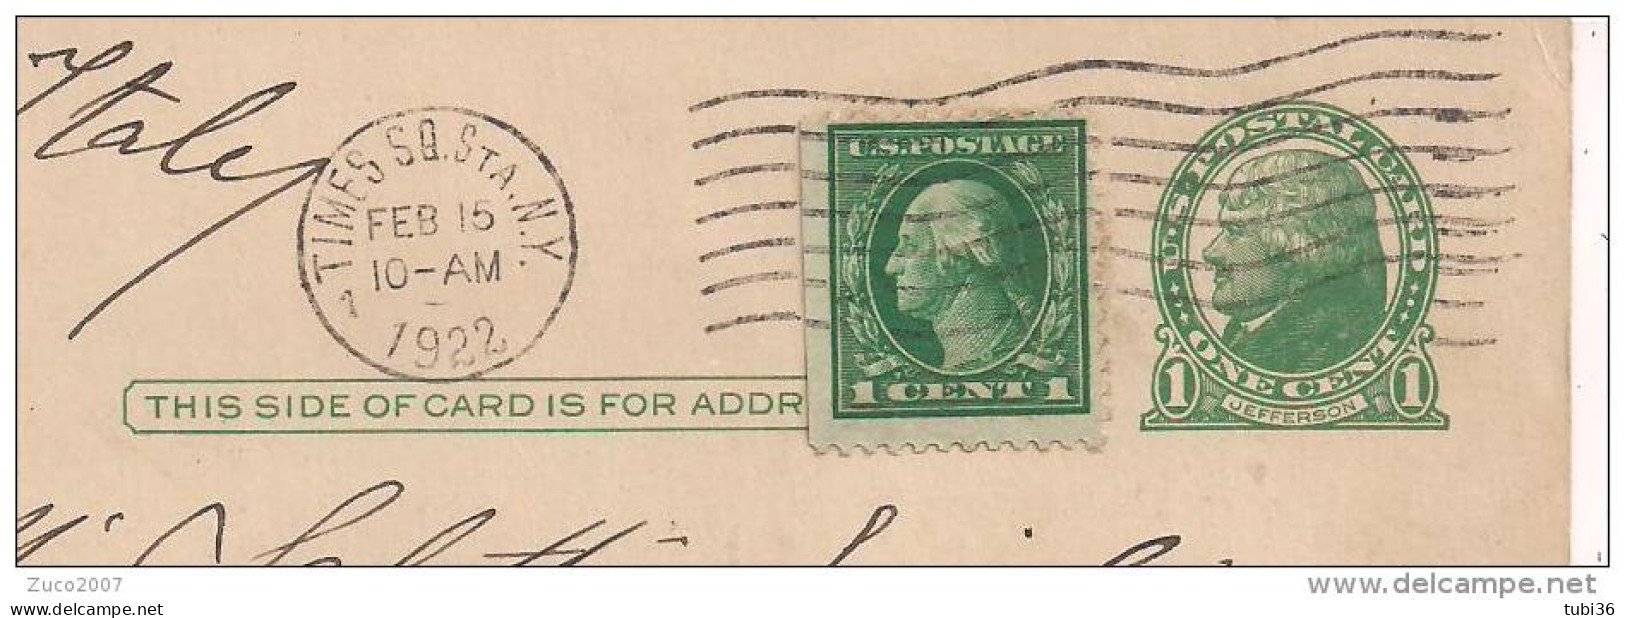 FULL POST ONE CENT, JEFFERSON, BY ADDING CENT.1, USED 1922 POSTAL STAMP NY FOR MODENA, ITALY, - Time Square